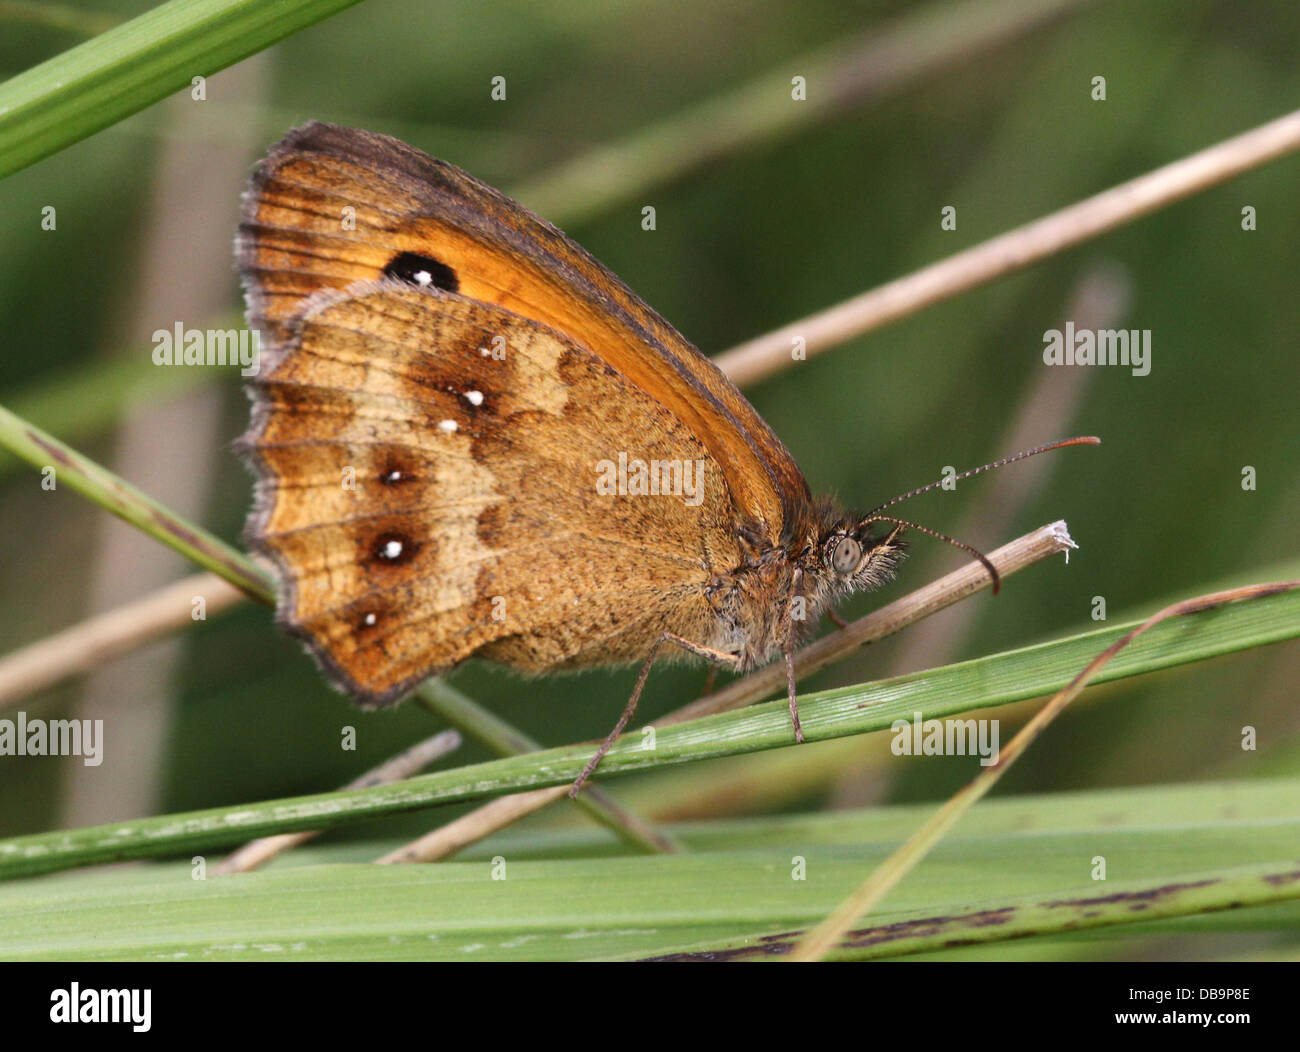 Macro of a Gatekeeper or  Hedge Brown butterfly (Pyronia tithonus) foraging on a flower Stock Photo